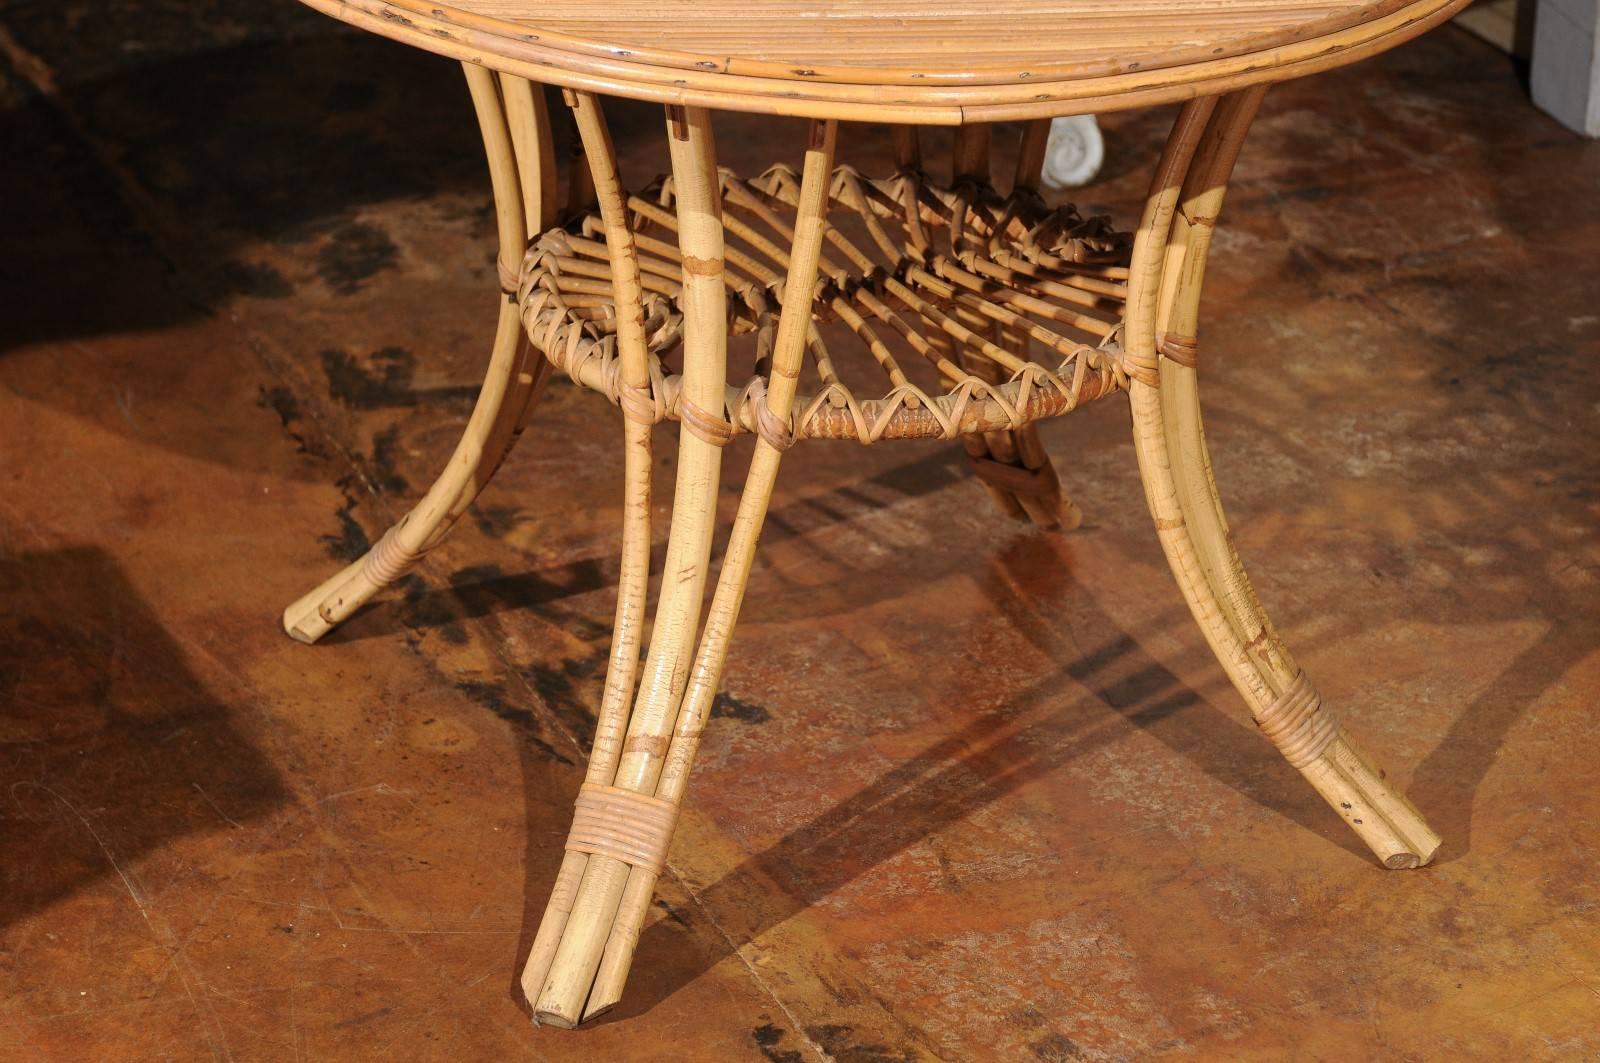 20th Century French Mid-Century Rattan Round Side Table with Lower Shelf and Splayed Legs